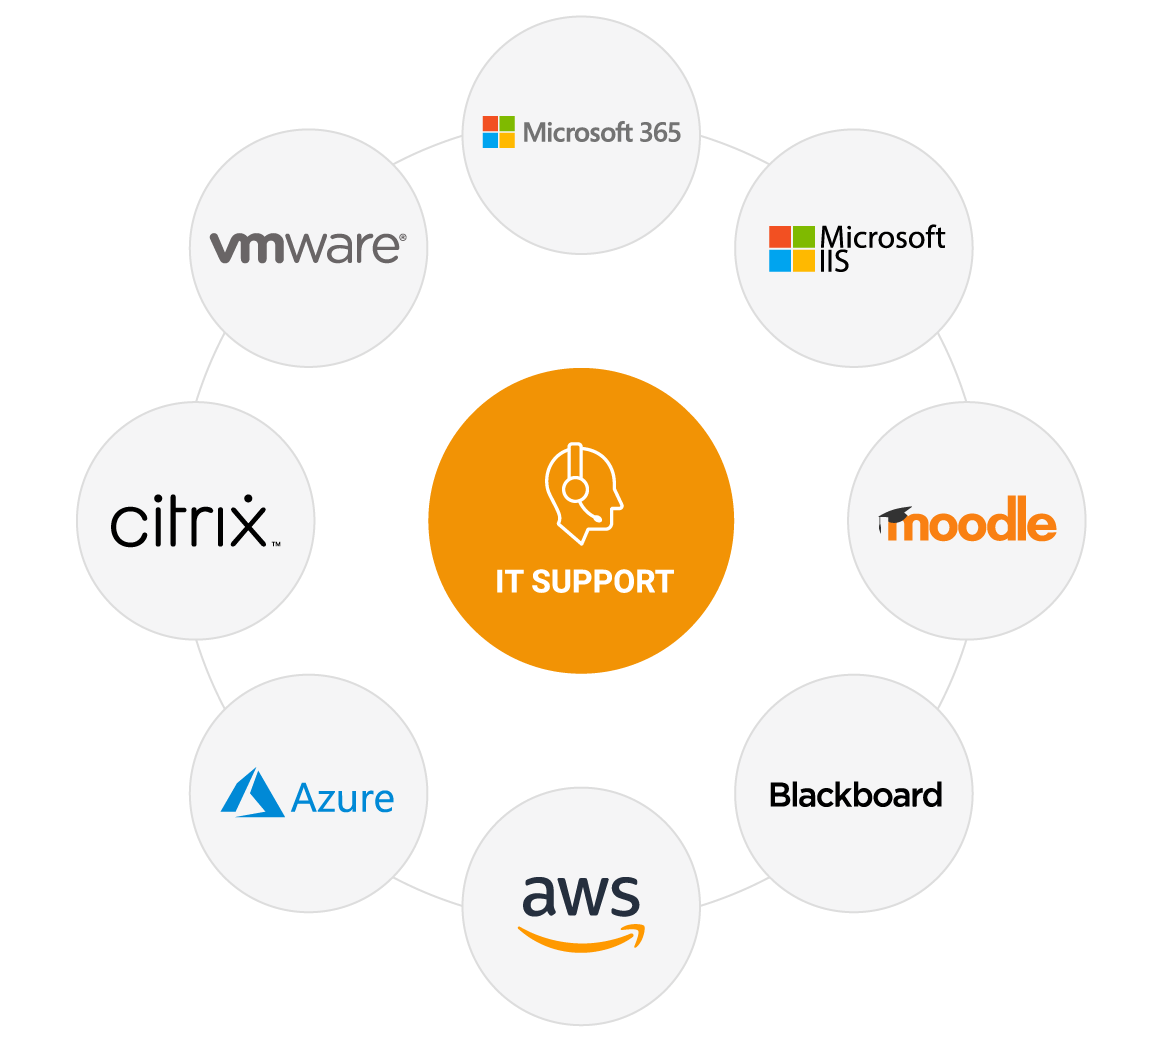 Image shows logos of technologies and applications widely monitored in education - Citrix, VMware, Microsoft 365, Microsoft IIS, Moodle, Blackboard, AWS cloud, Azure Cloud.